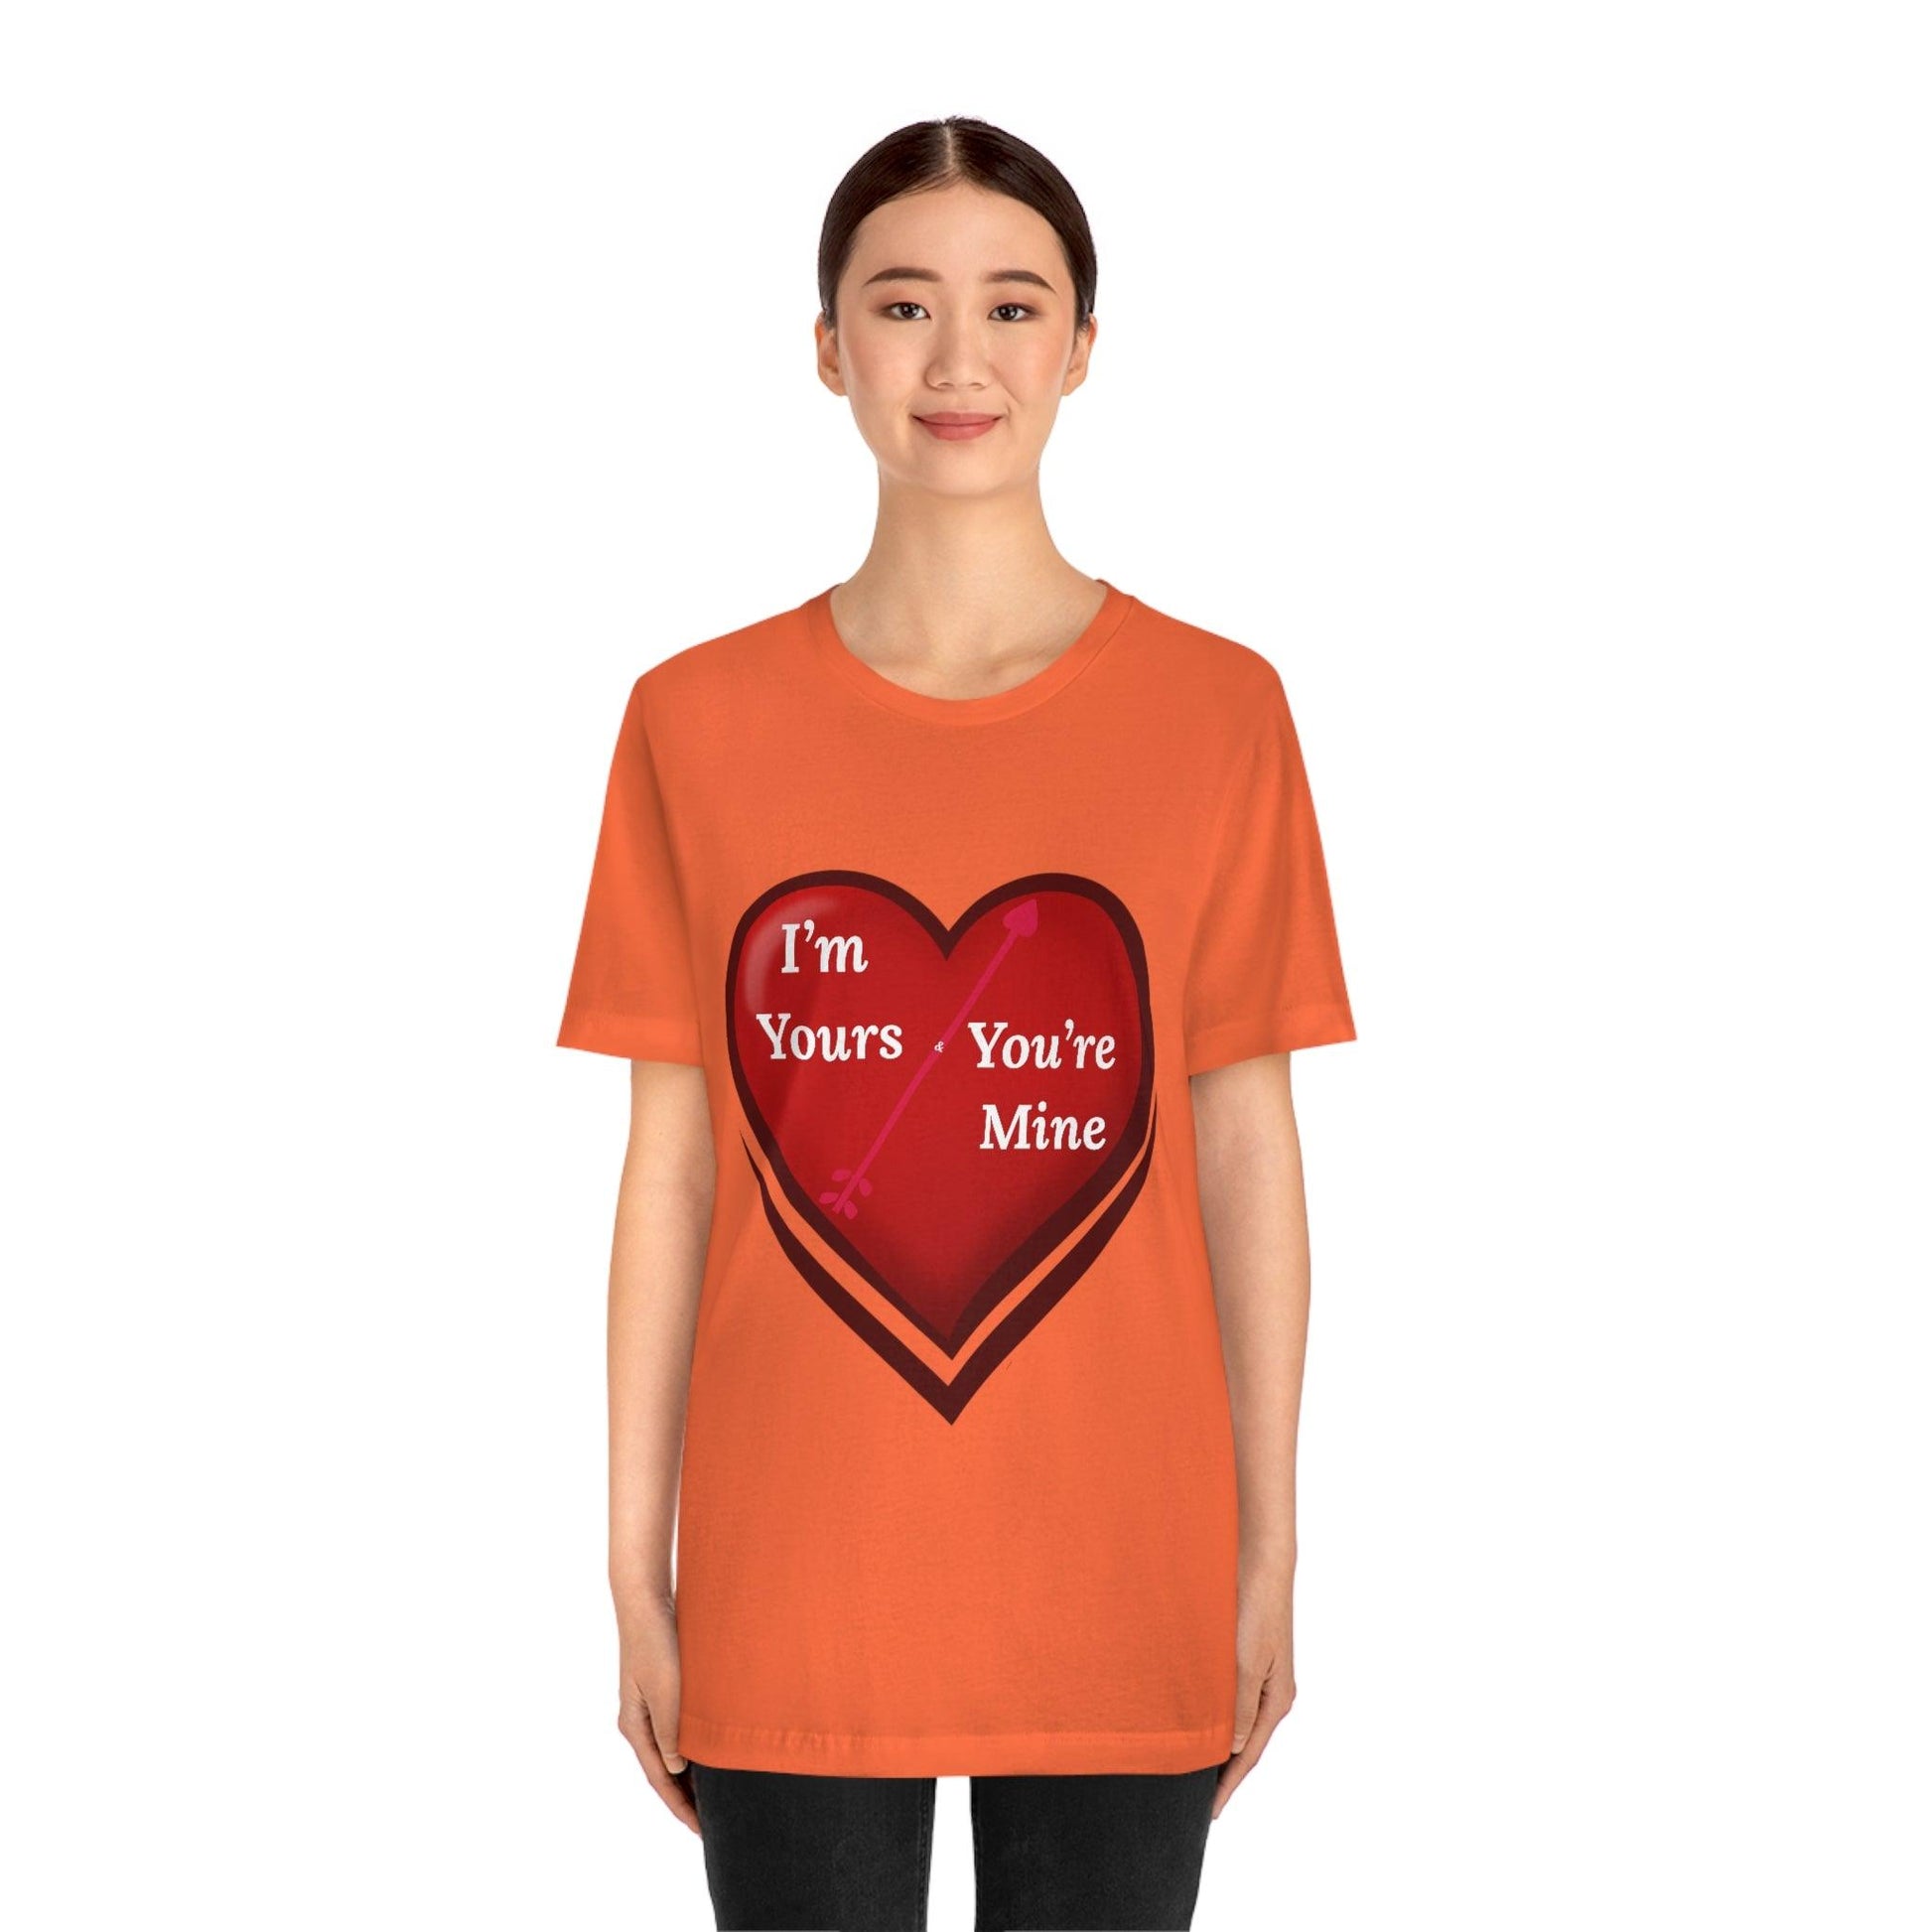 I'm Yours and You're Mine Heart Tee - Giftsmojo